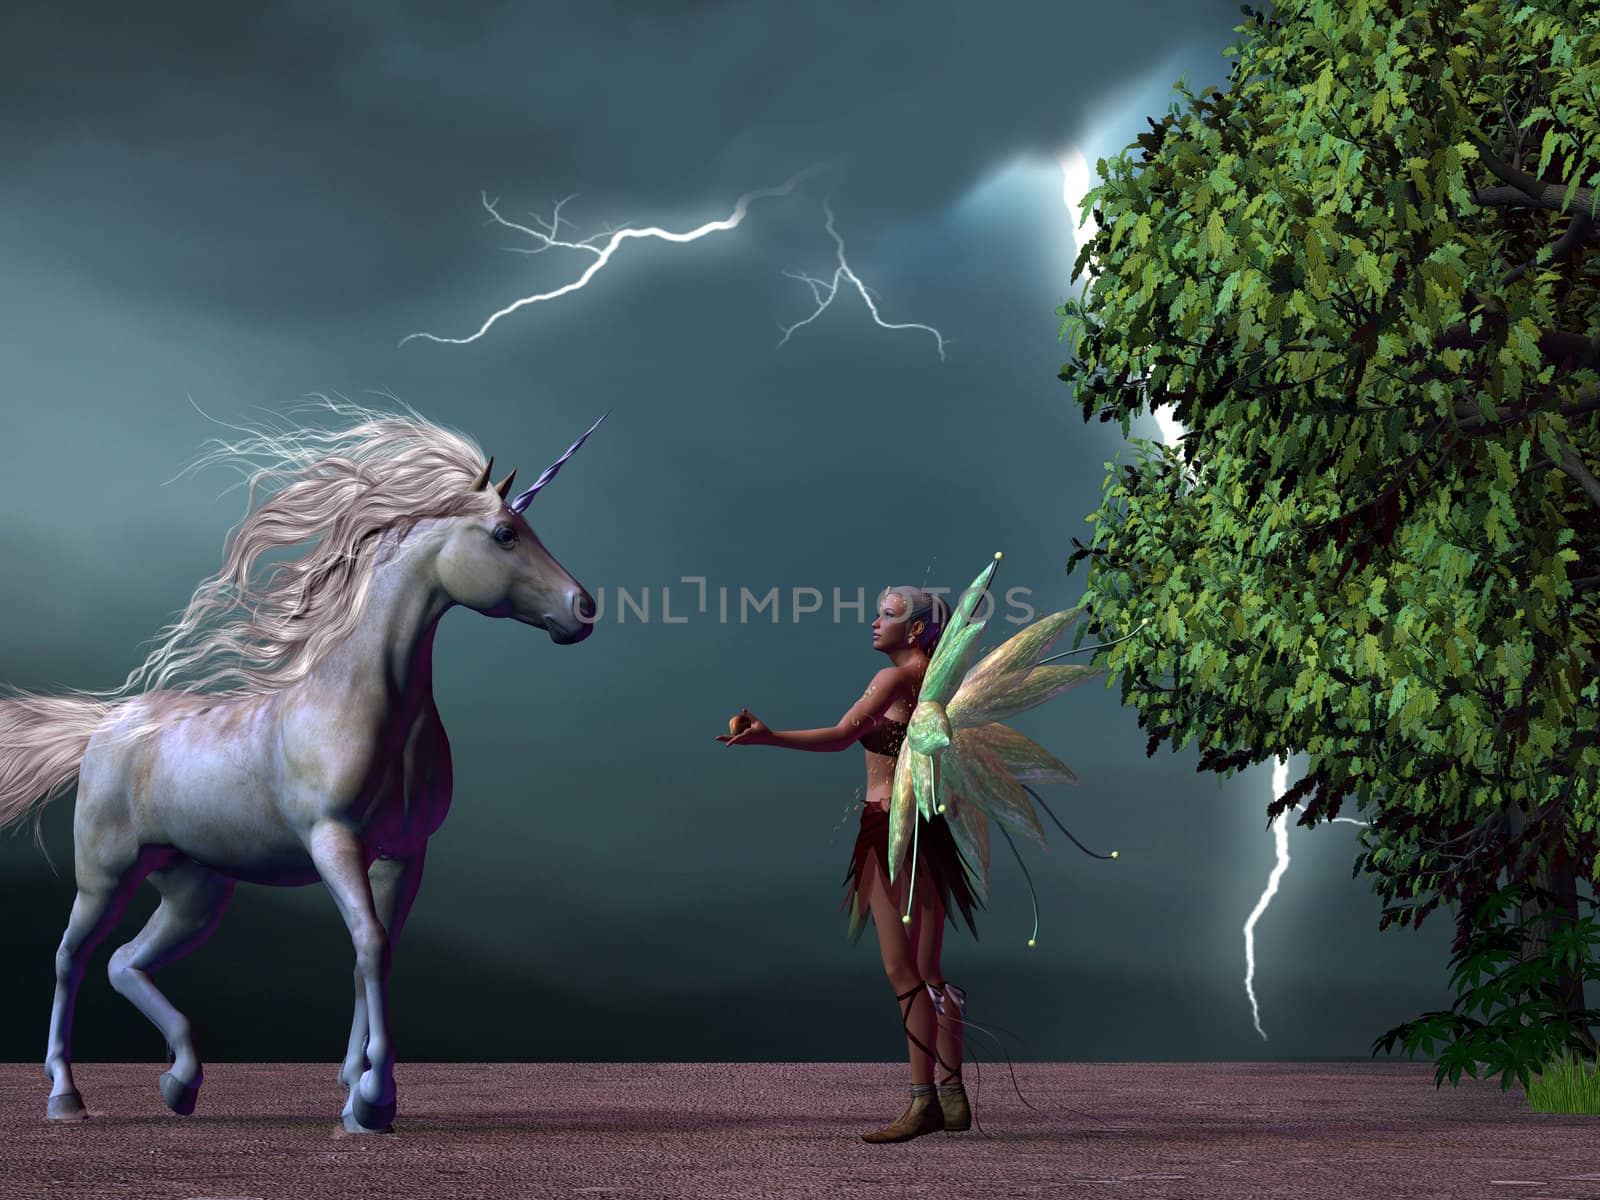 A fairy offers a frightened unicorn stag an apple to get him back into the enchanted forest during a thunderstorm.